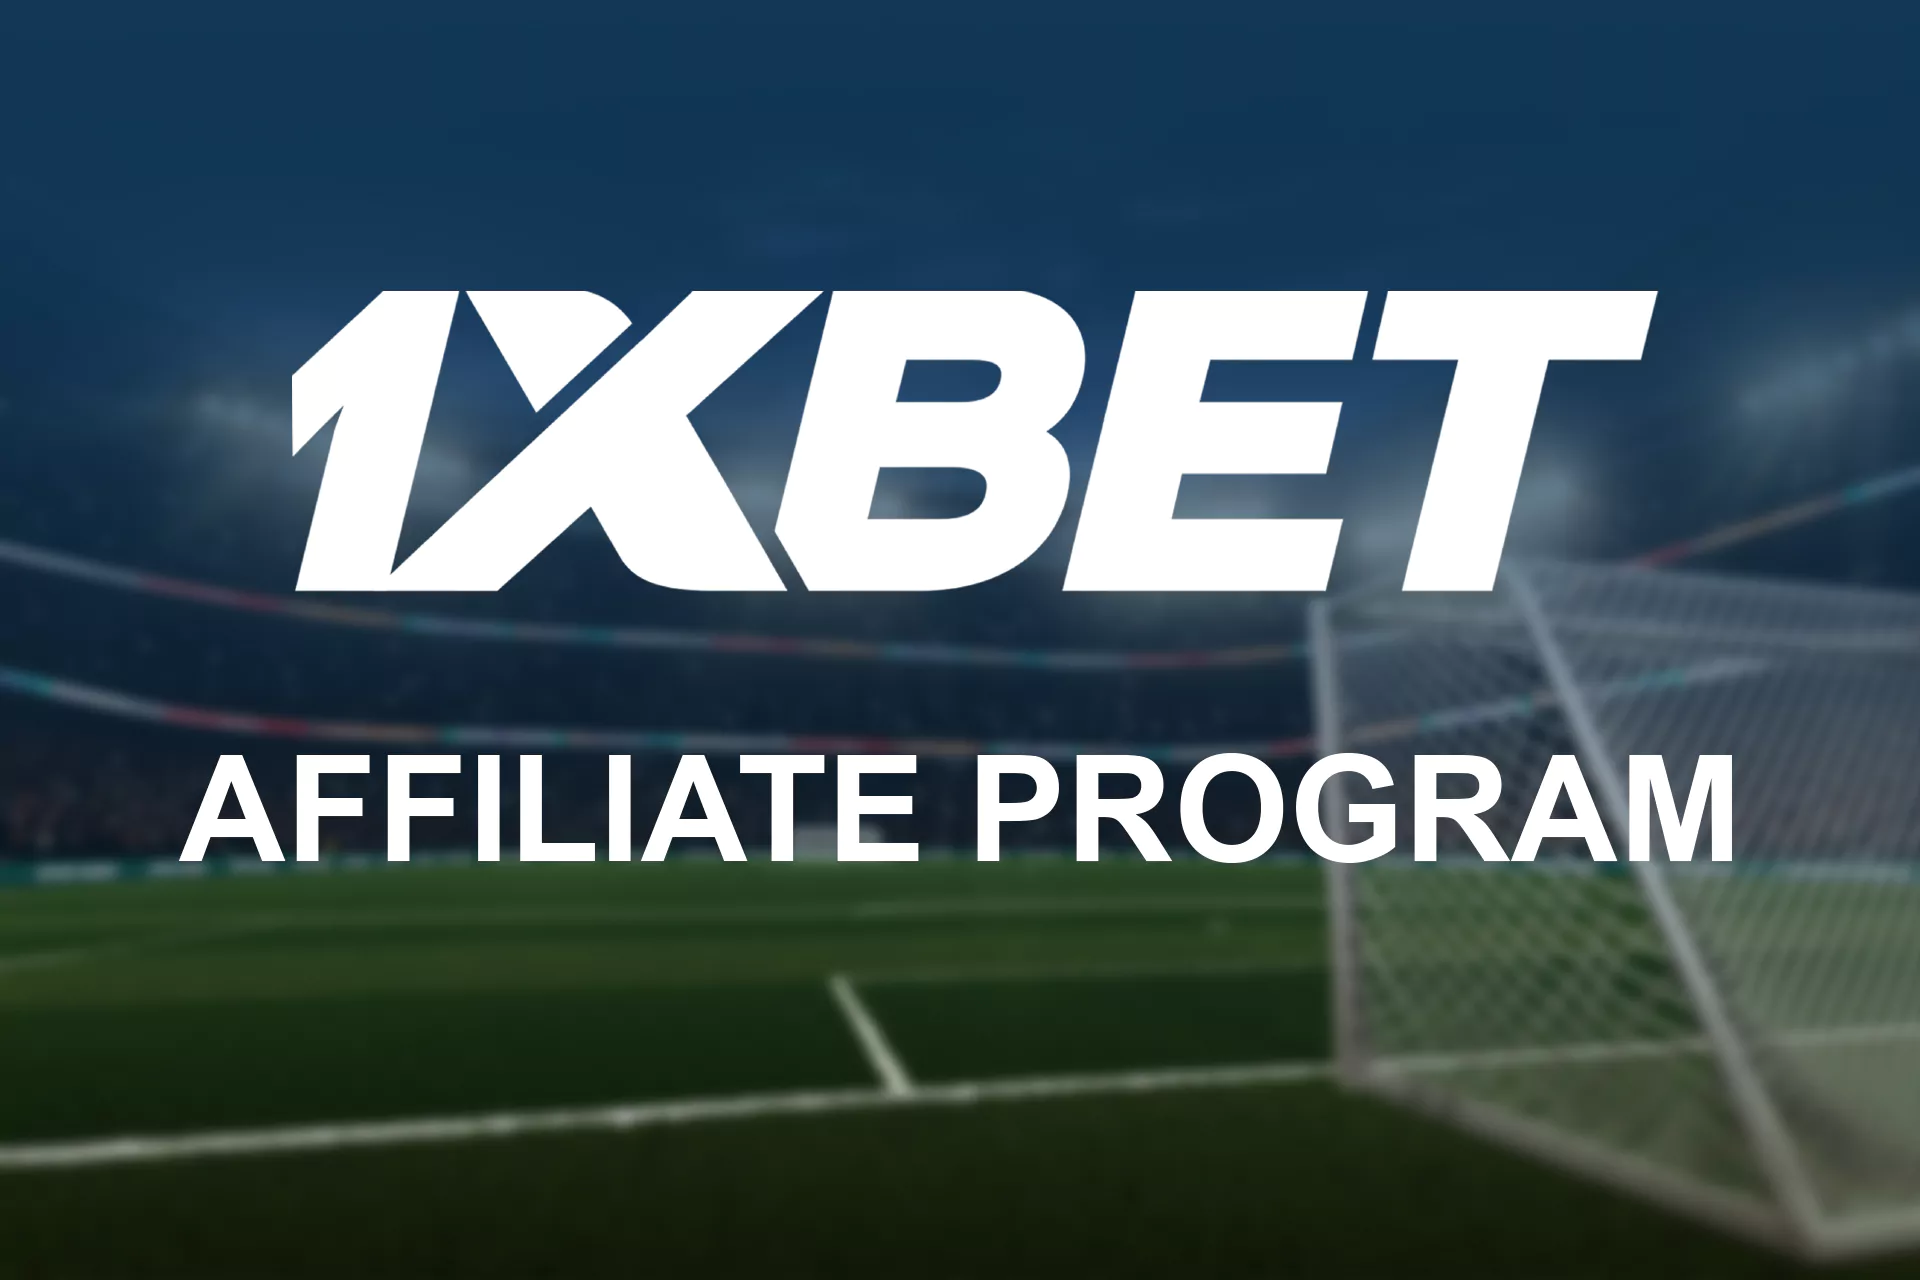 Join the 1xBet affiliate program.